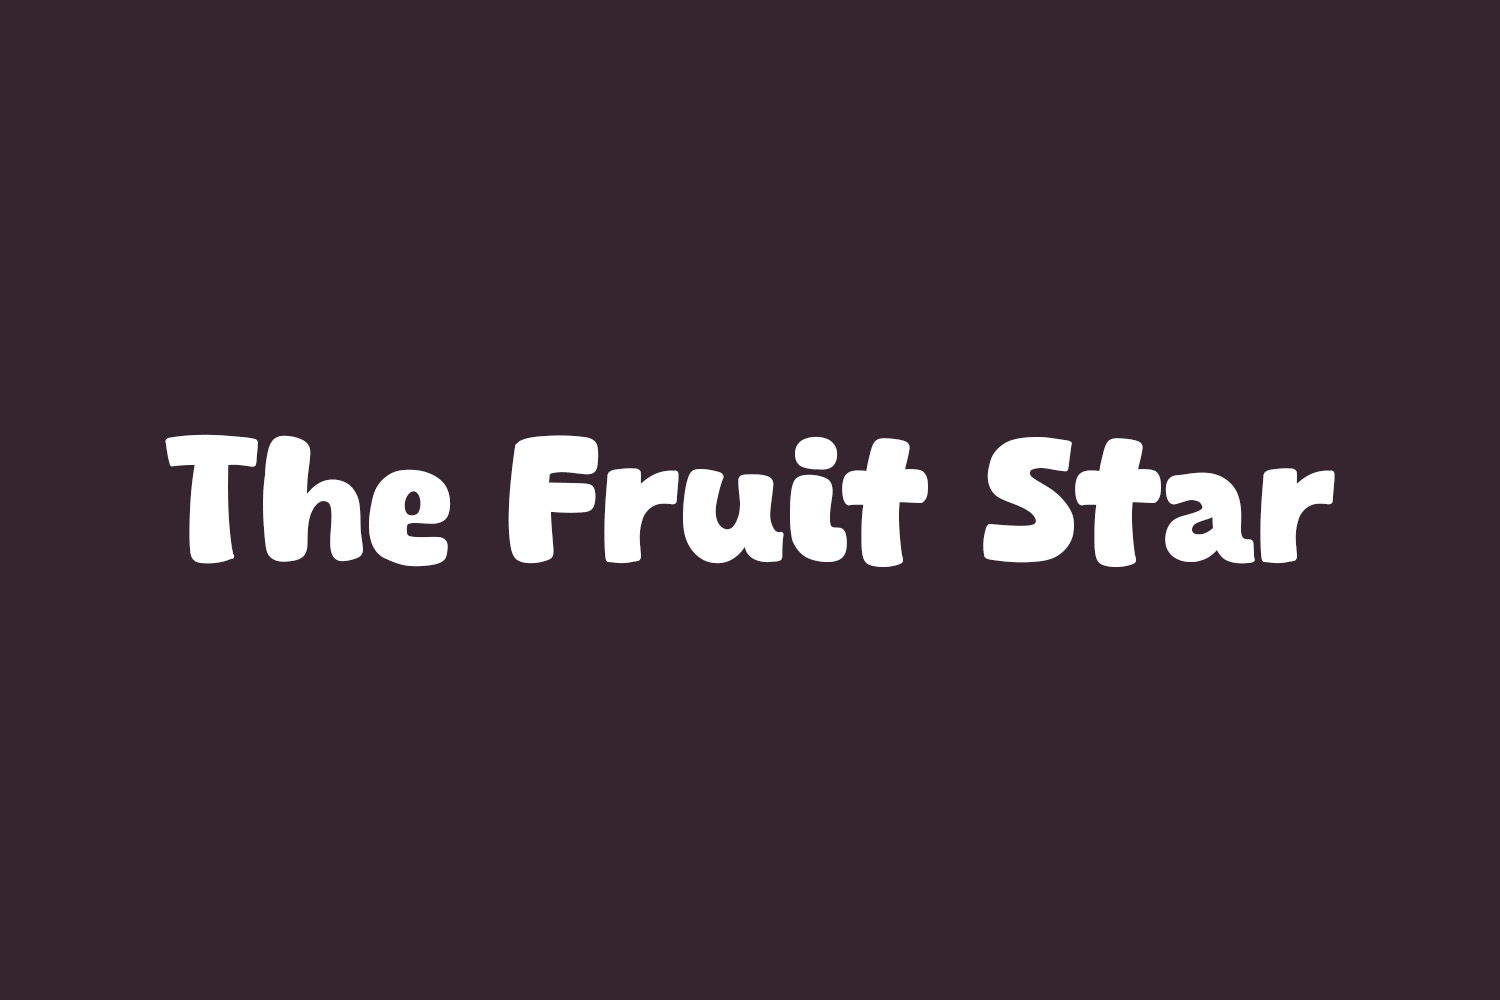 The Fruit Star Free Font